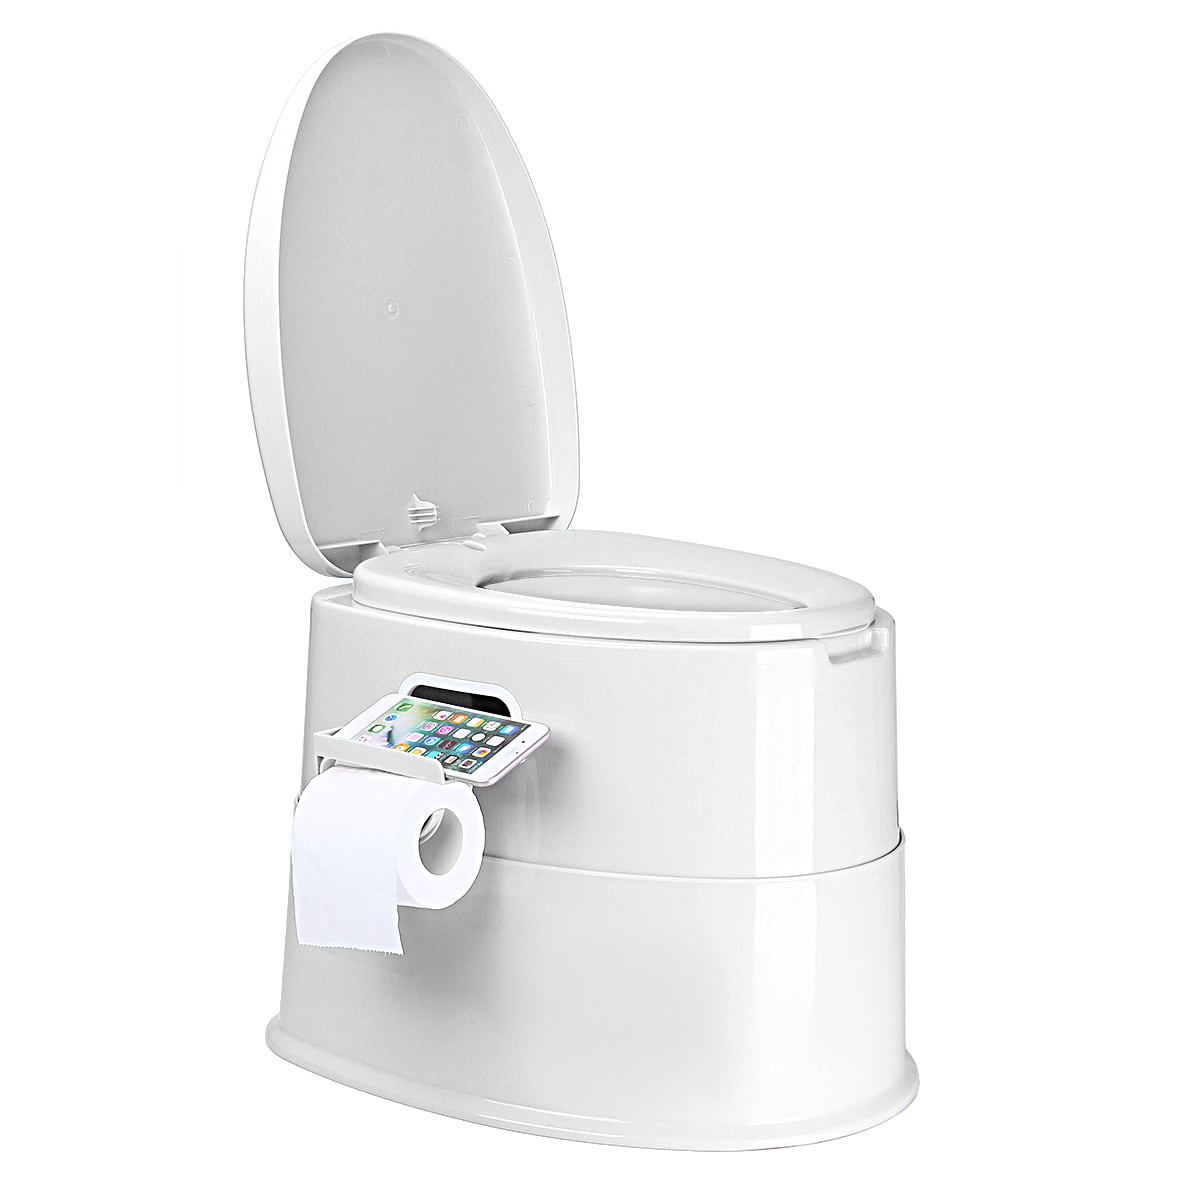 Portable Toilet Potty Indoor Bedroom Commode Potty with Detachable Inner  Bucket and Toilet Paper Holder Outdoor Hiking Camping Toilet